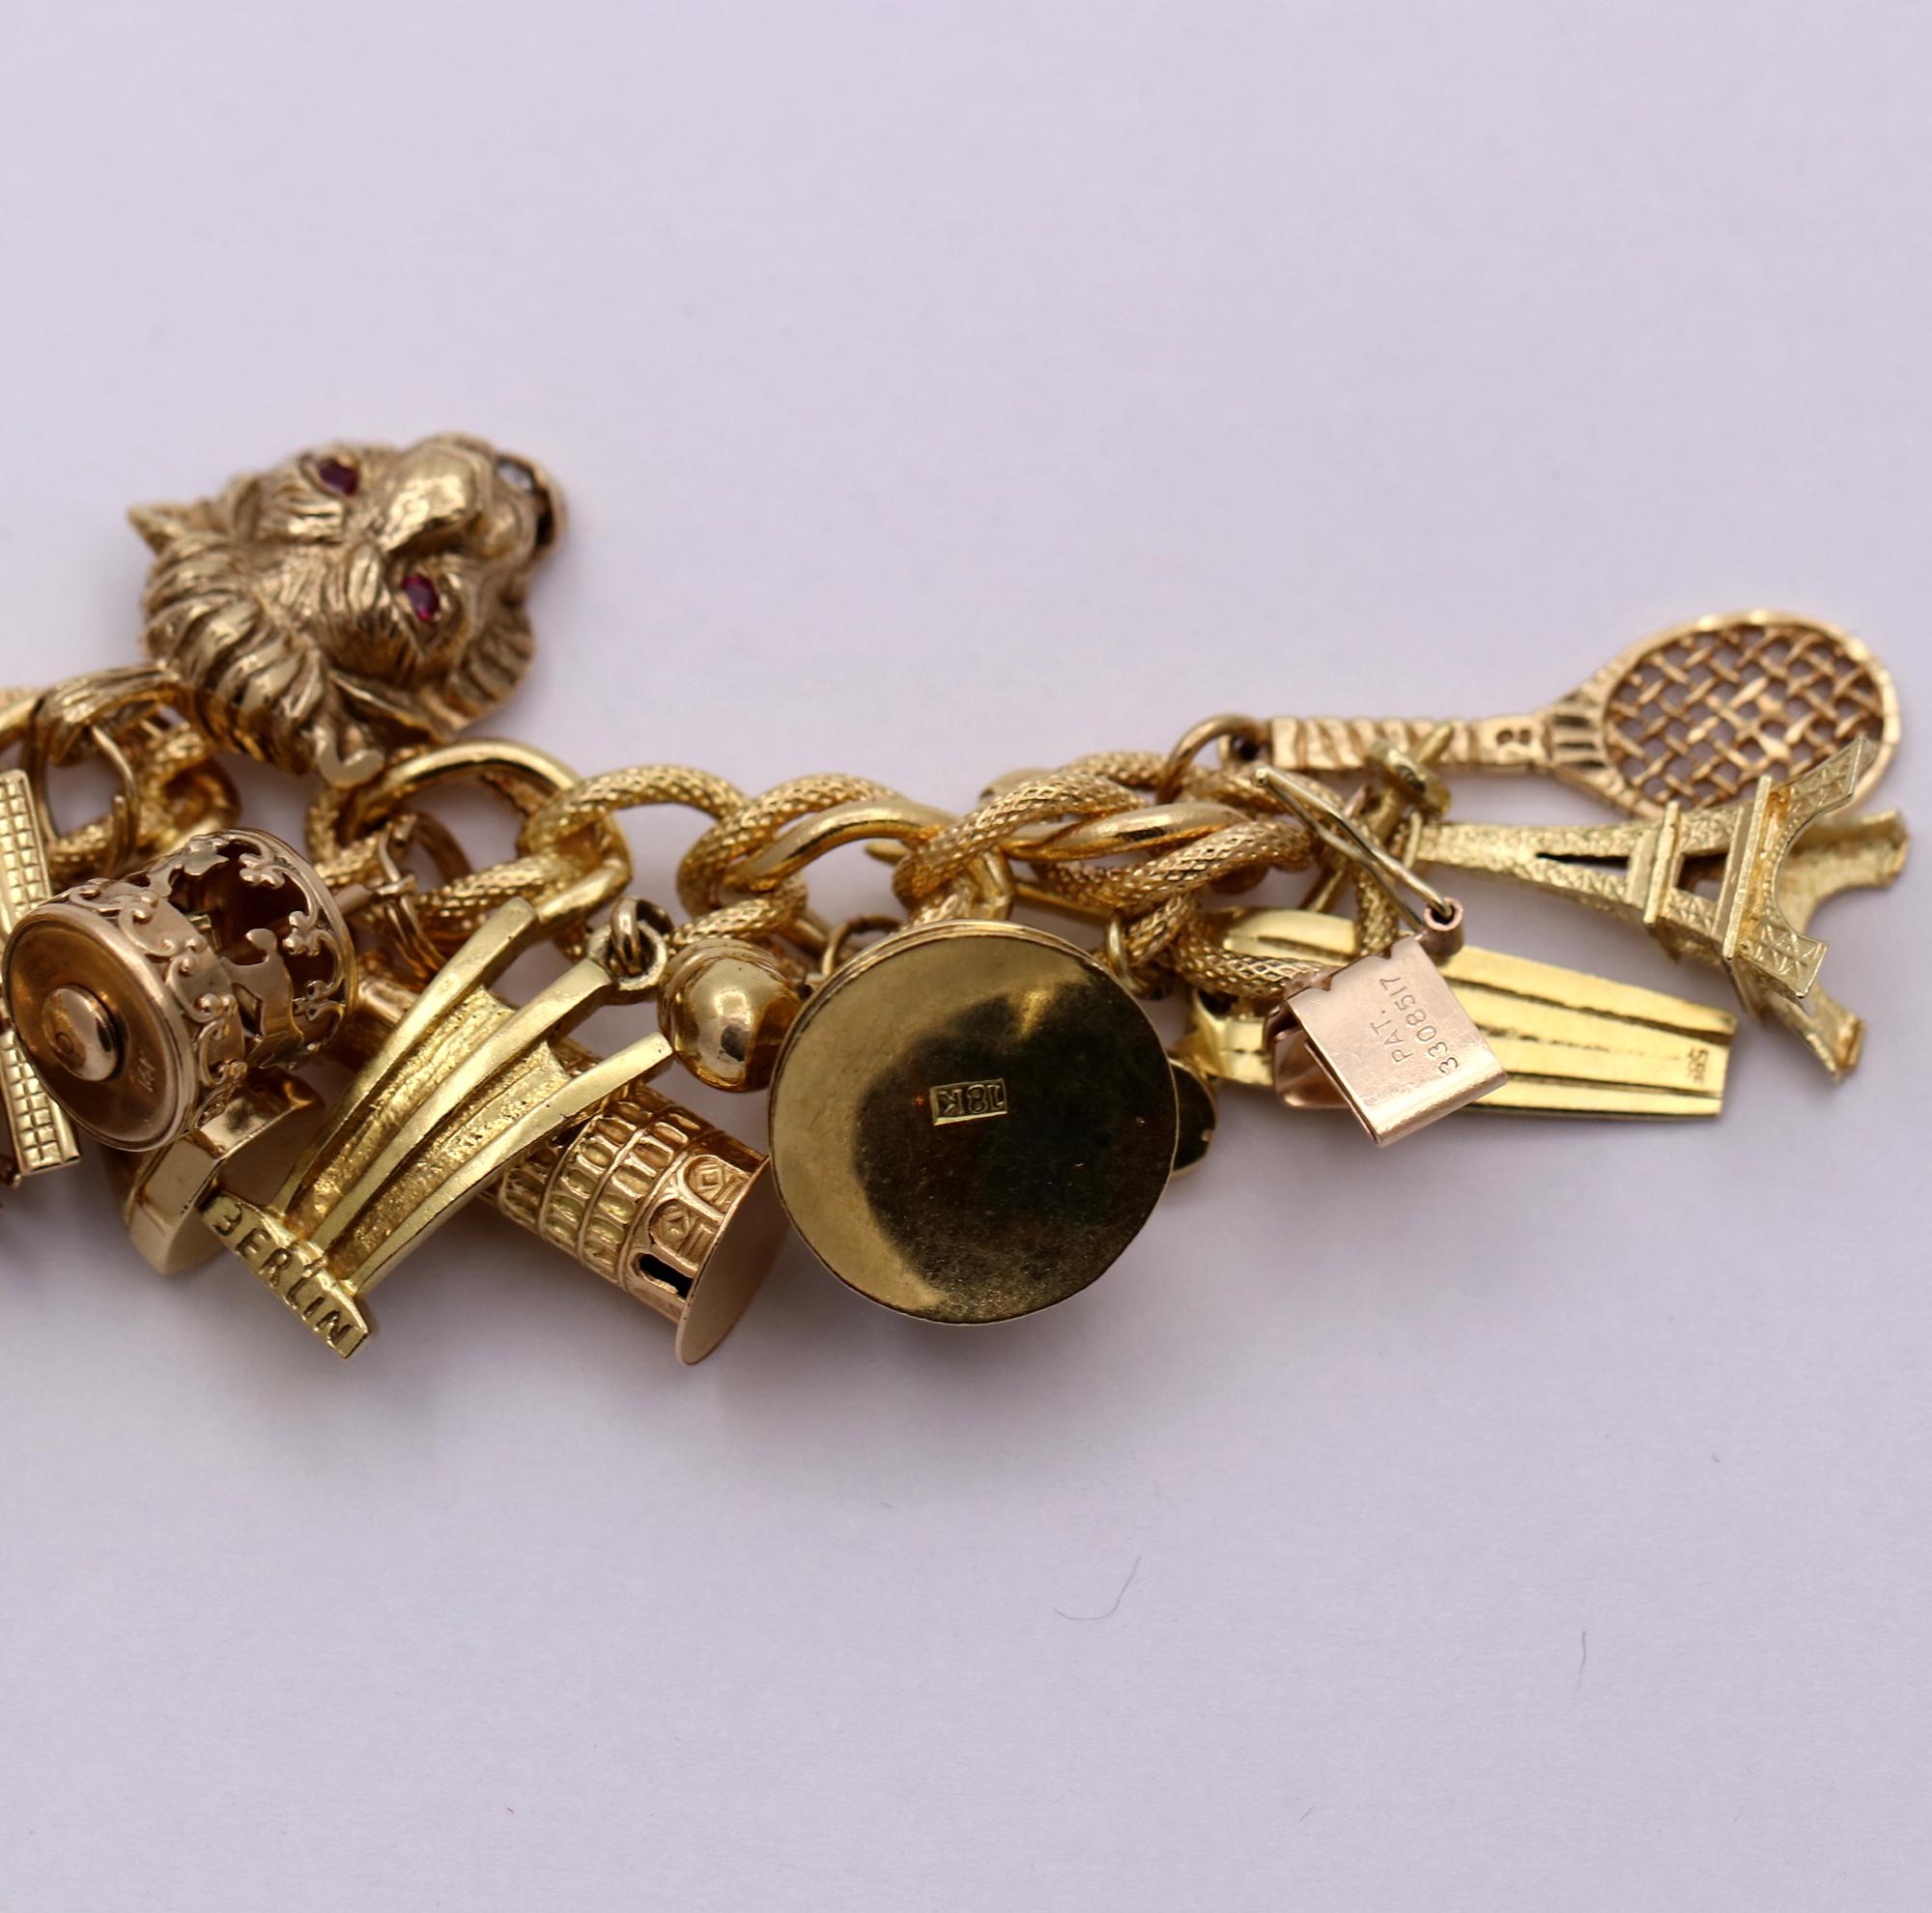 Midcentury Gold Charm Bracelet with 20 Travel Themed Charms 1